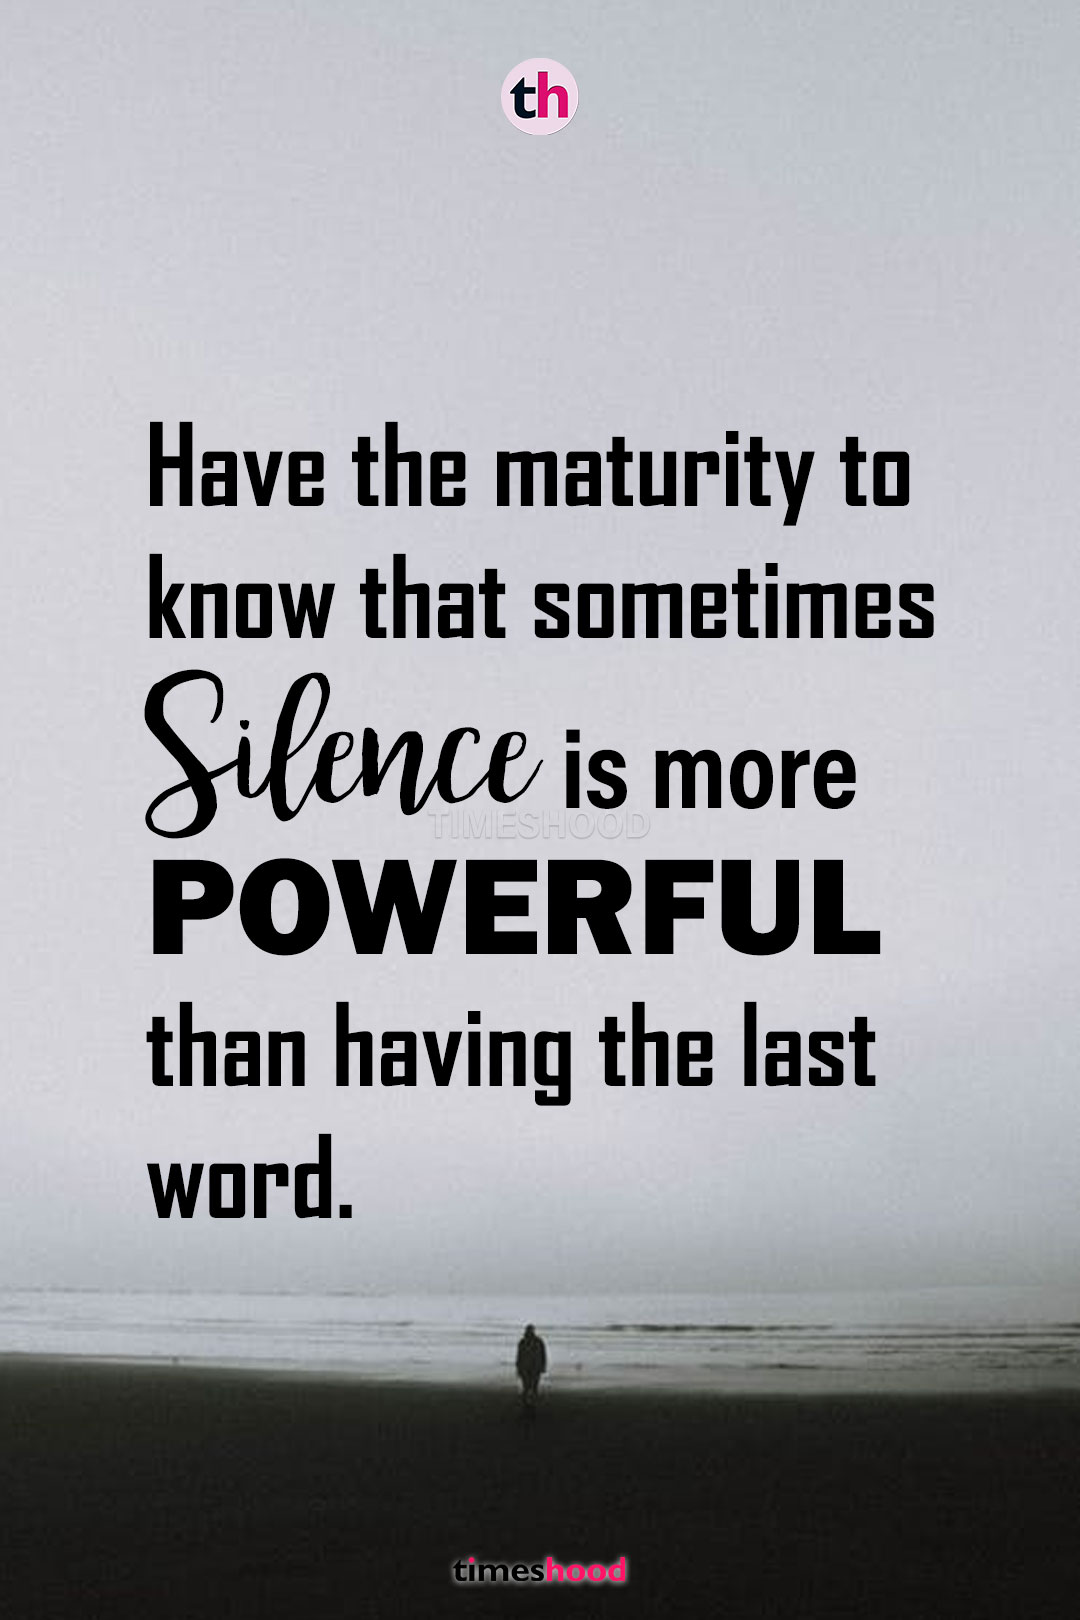 silence is more powerful than having the last word. - Best silence quotes